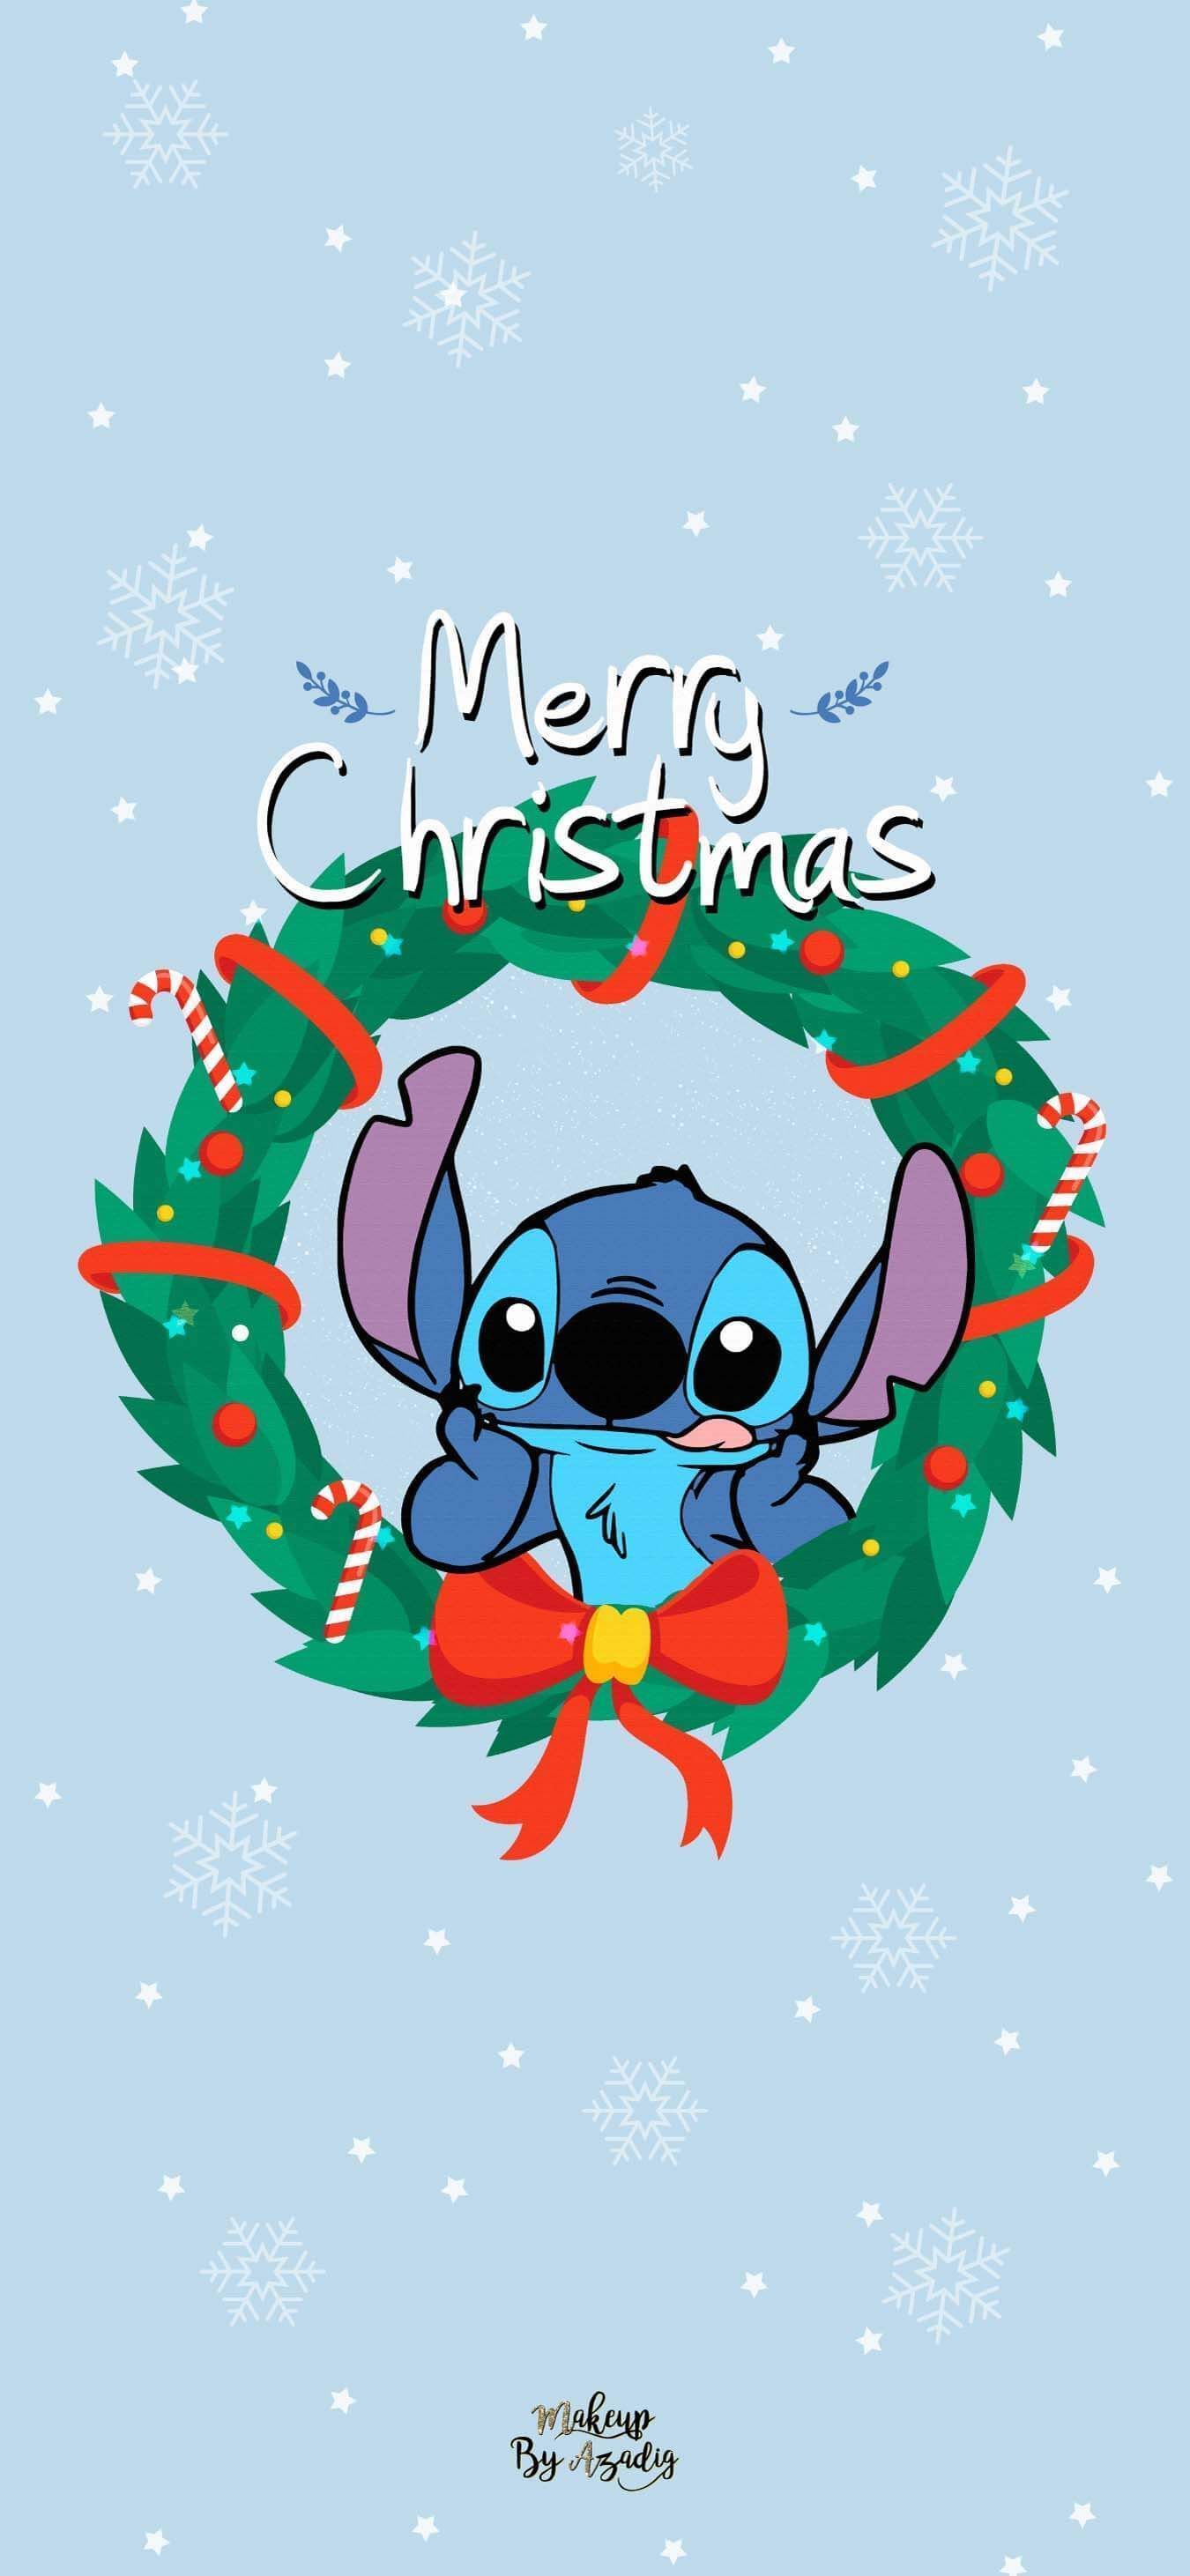 Cute Wallpaper iPhone Disney Stitch for Your iPhone. Wallpaper iphone christmas, Cute christmas wallpaper, Christmas wallpaper tumblr